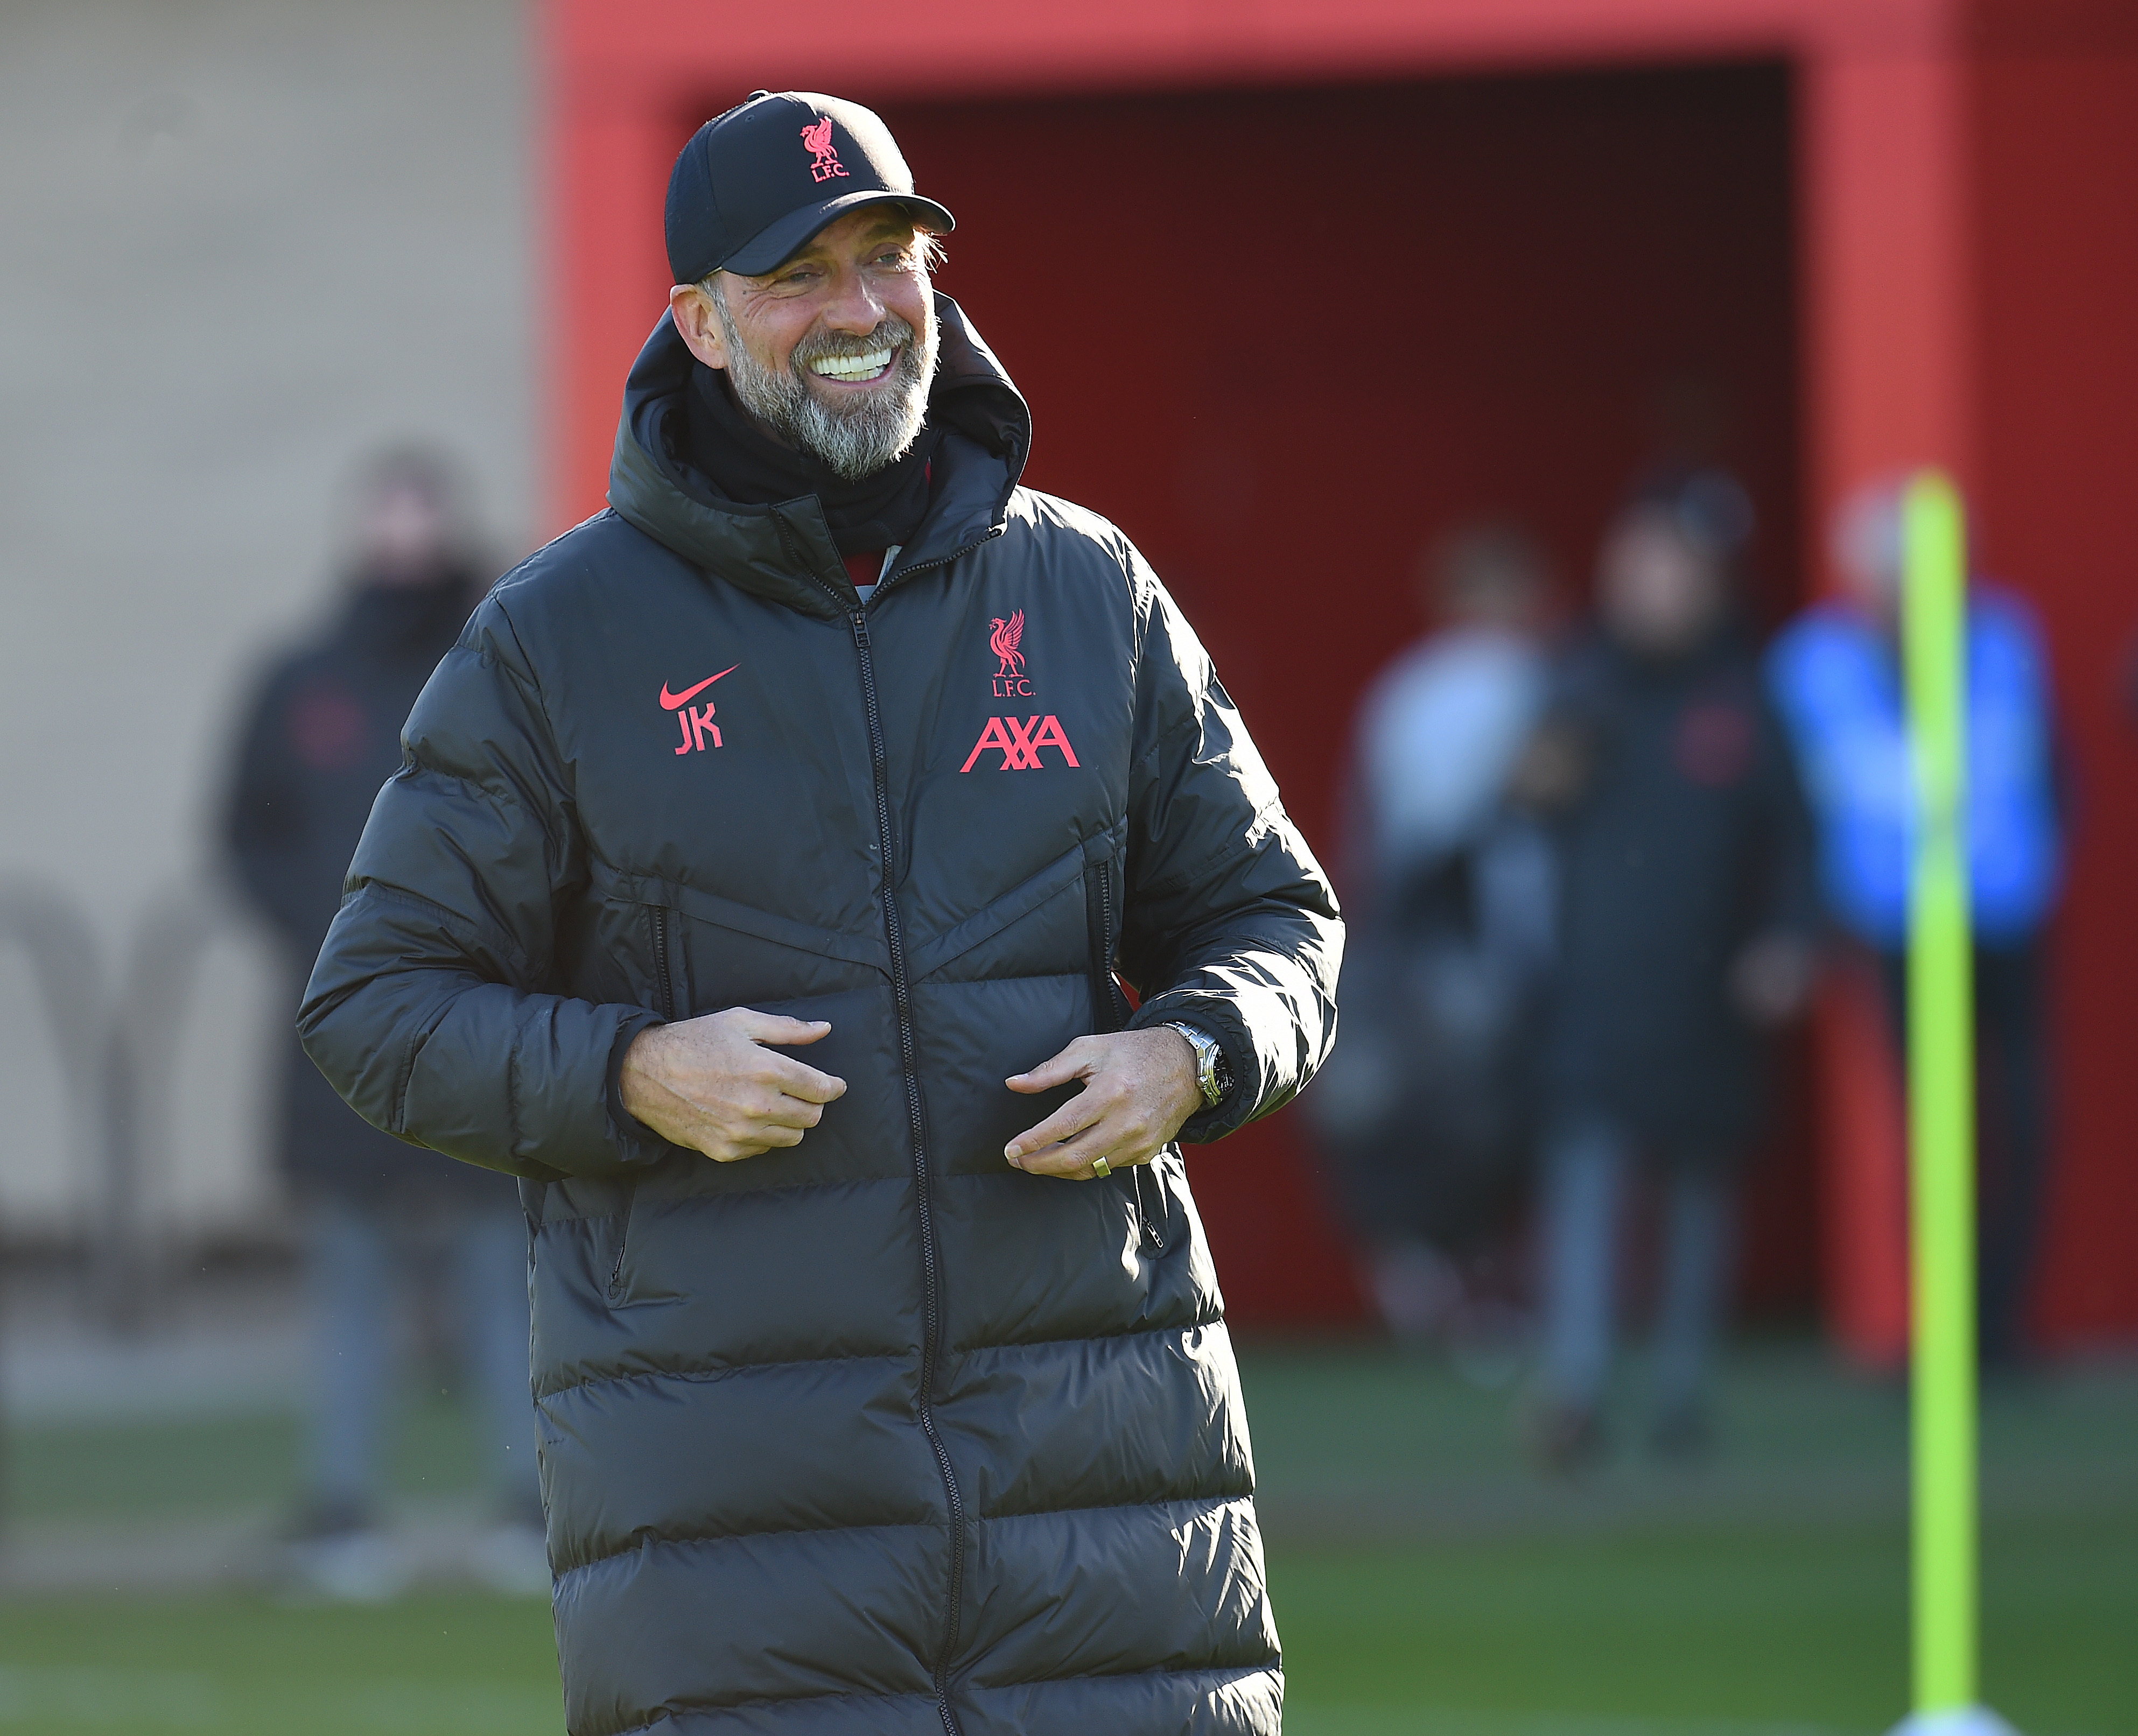 Jürgen Klopp, manager of Liverpool, smiling during a training session at AXA Training Centre on February 09, 2023 in Kirkby, England.